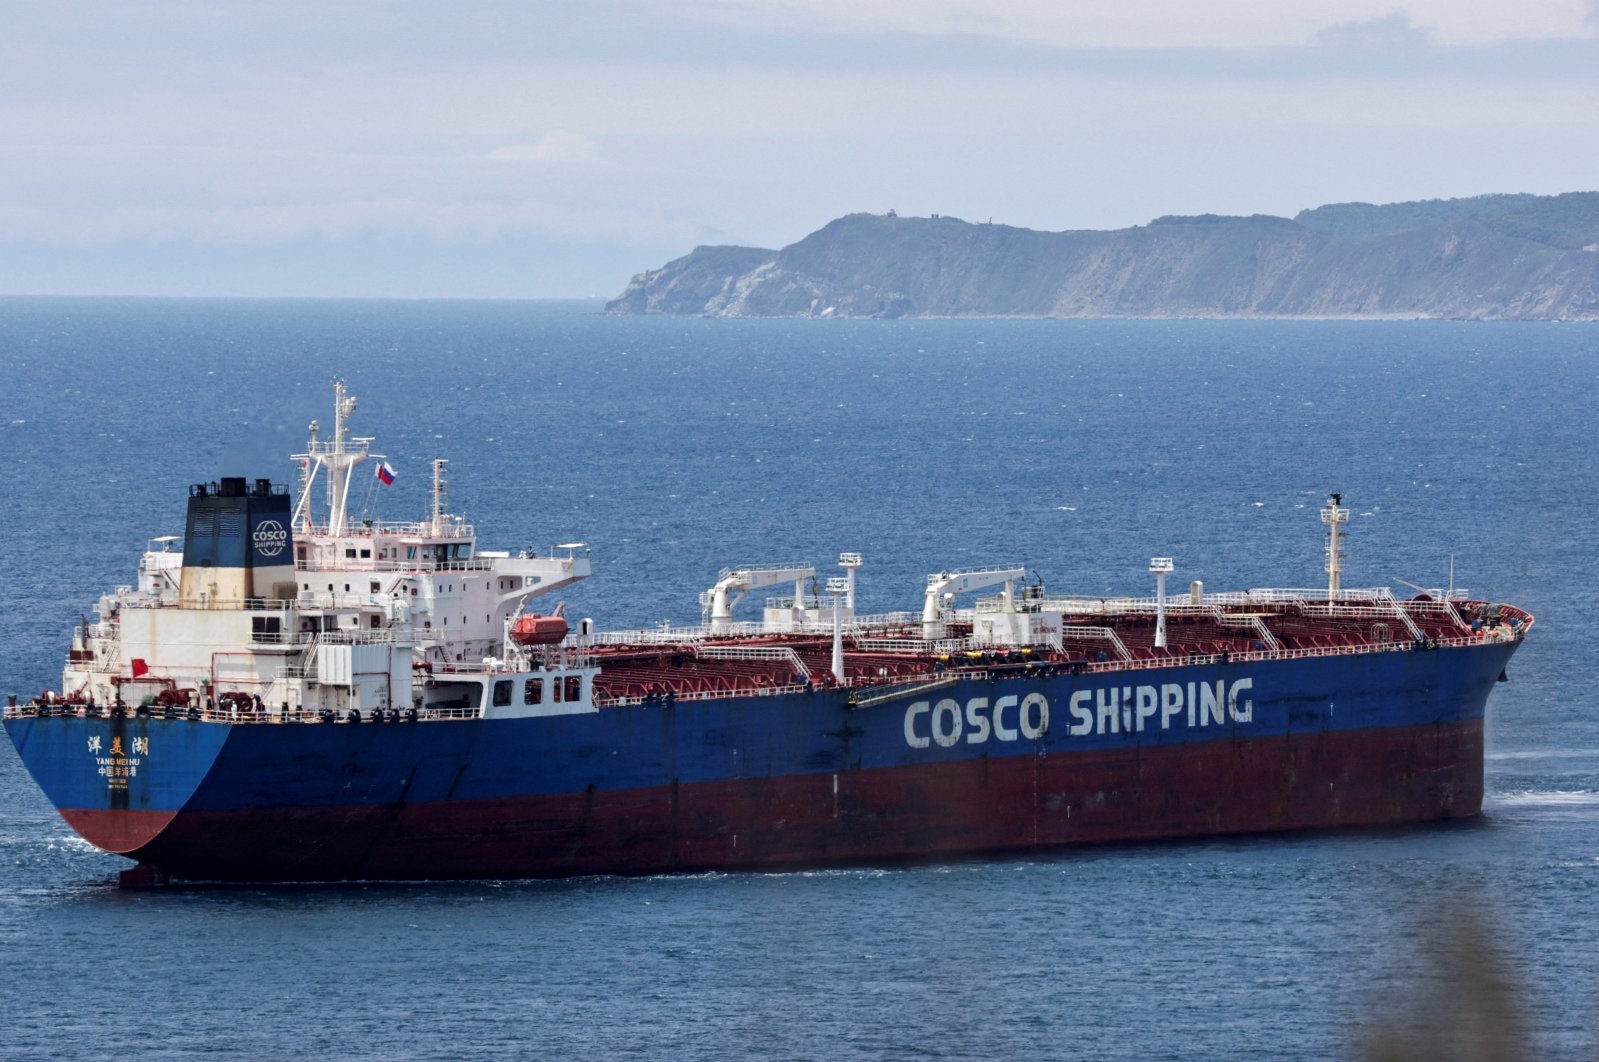 Yang Mei Hu oil products tanker owned by COSCO Shipping gets moored at the crude oil terminal Kozmino on the shore of Nakhodka Bay near the port city of Nakhodka, Russia, June 13, 2022. (Reuters Photo)